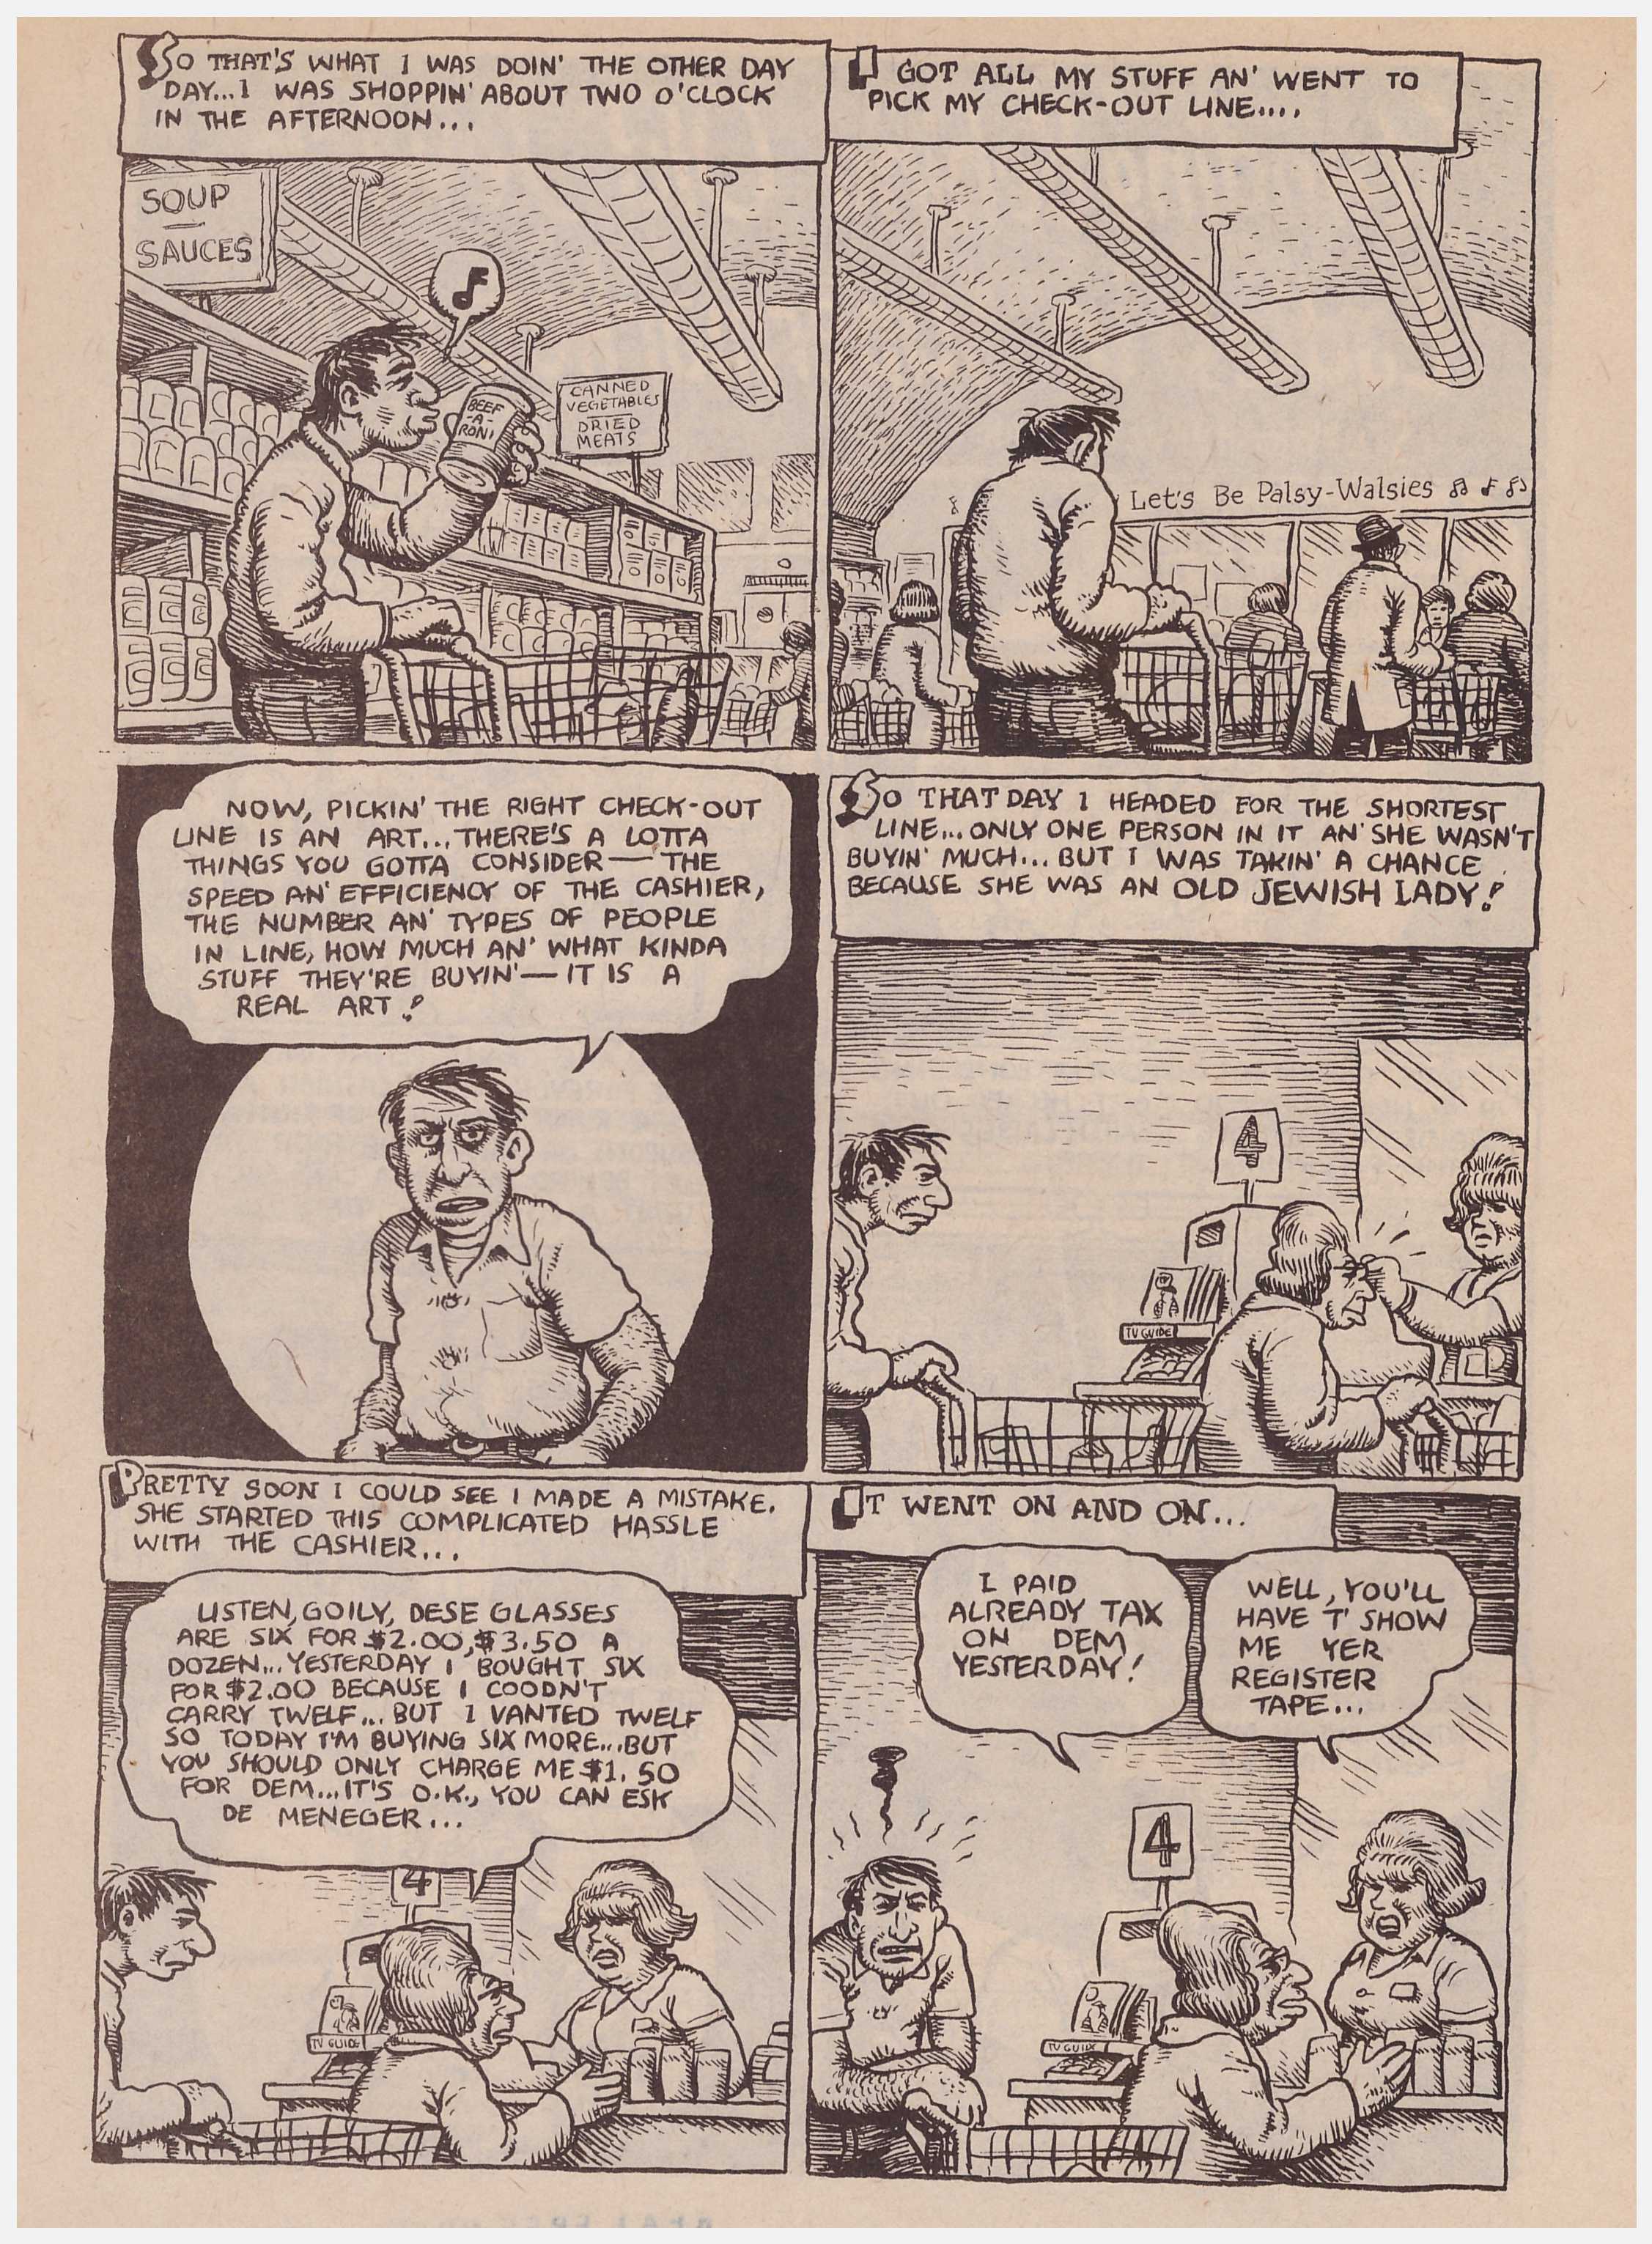 American Splendor The Life and Times of Harvey Pekar review